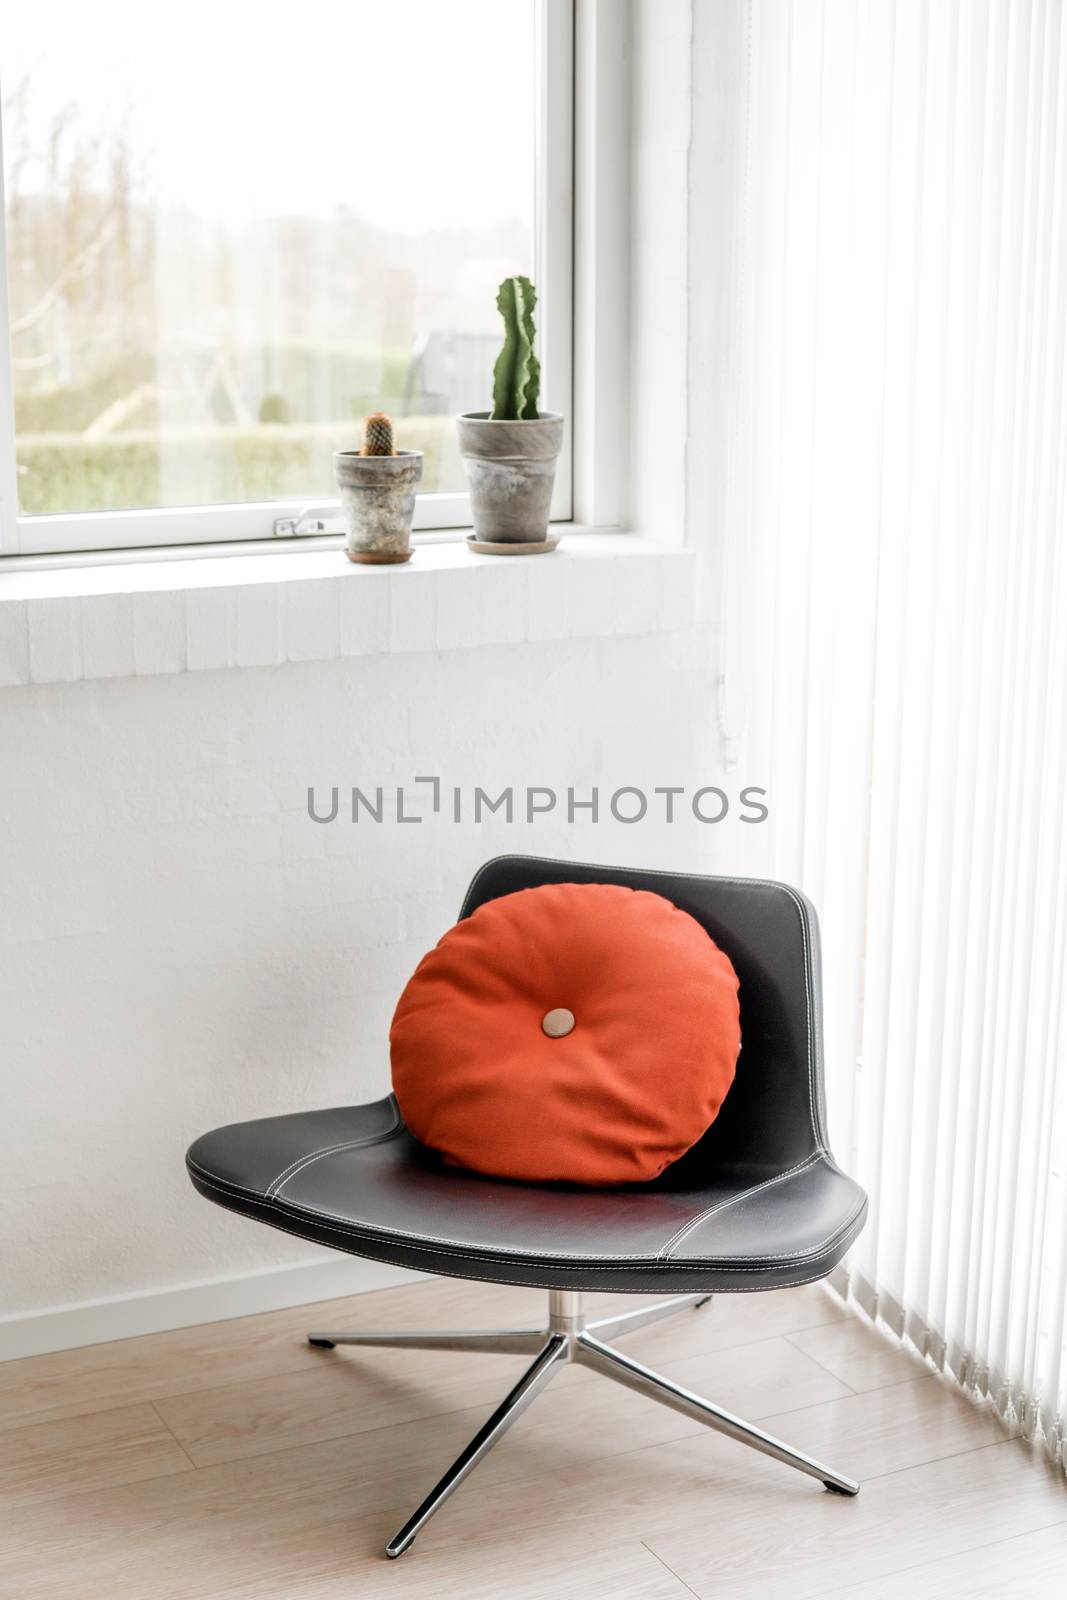 Black chair in a bright living room with a round orange pillow in retro design and cactus plants in the window